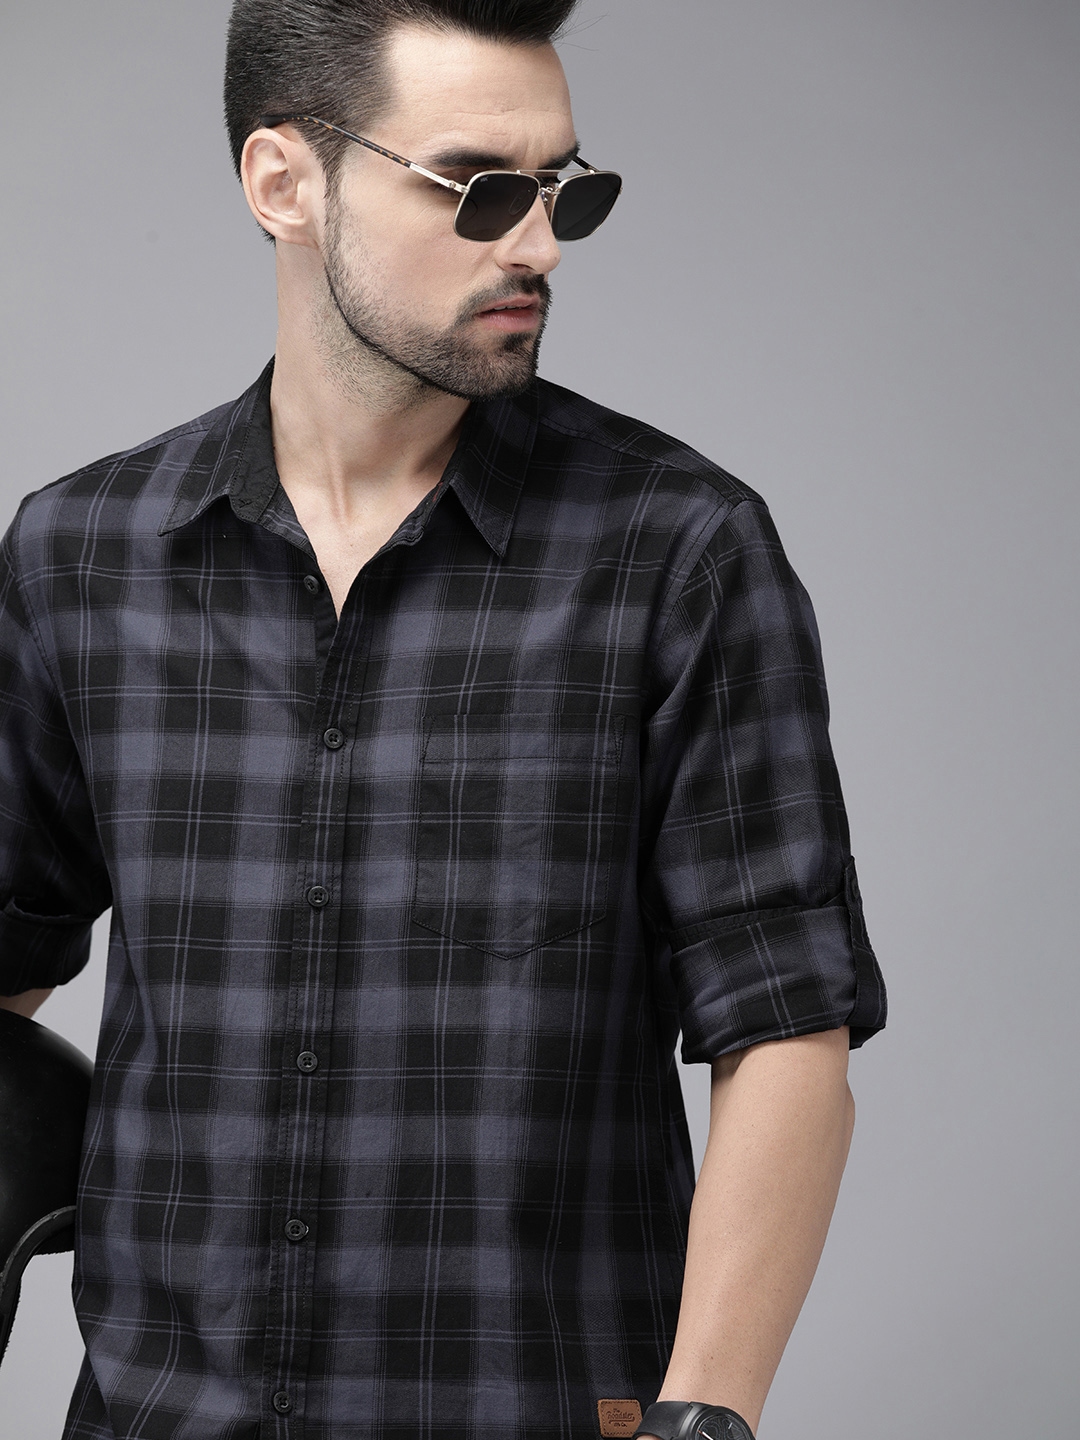 Buy Roadster Men Black & Grey Checked Pure Cotton Casual Shirt